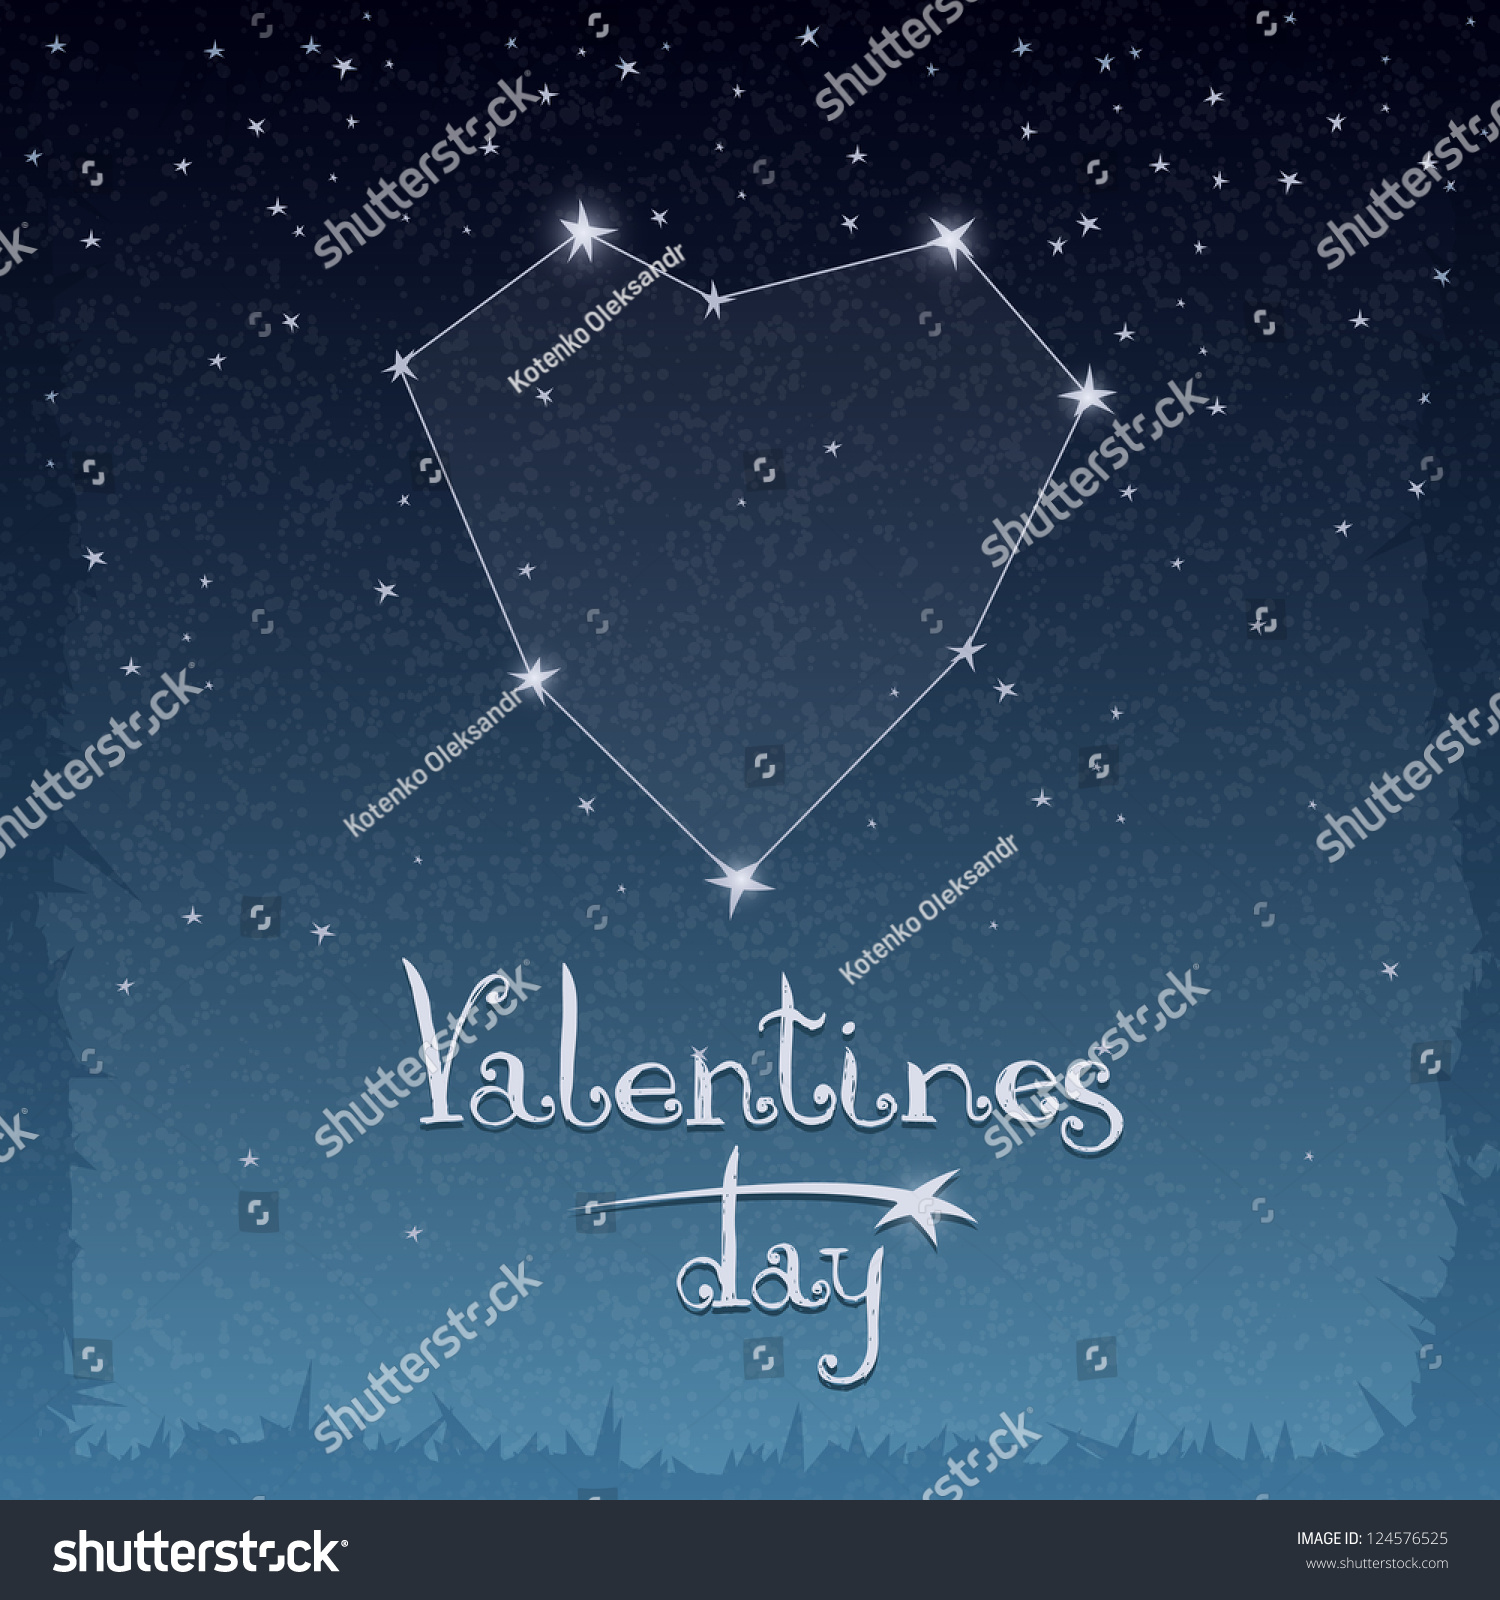 Is there a love constellation?